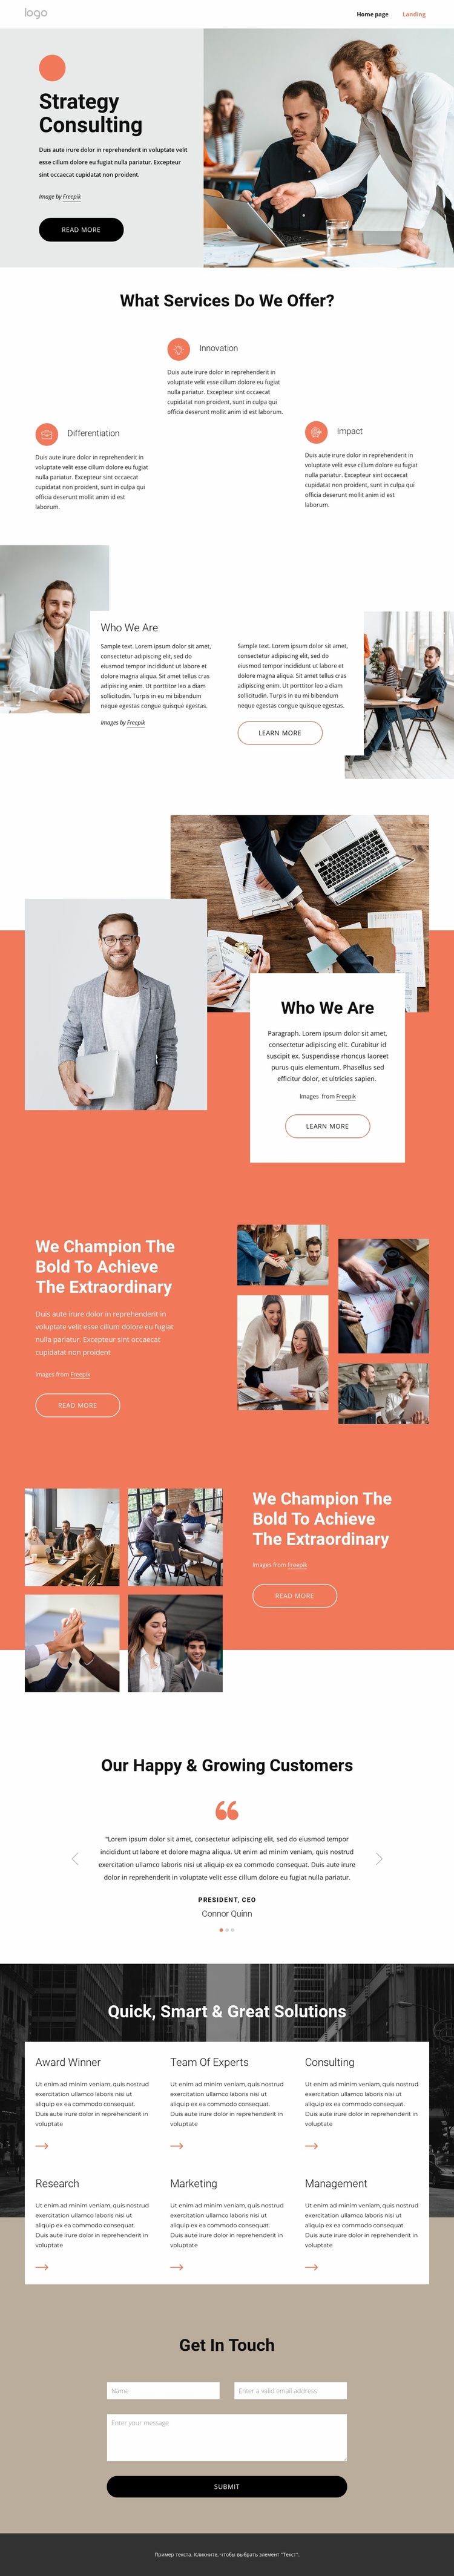 Align your technology strategy Landing Page